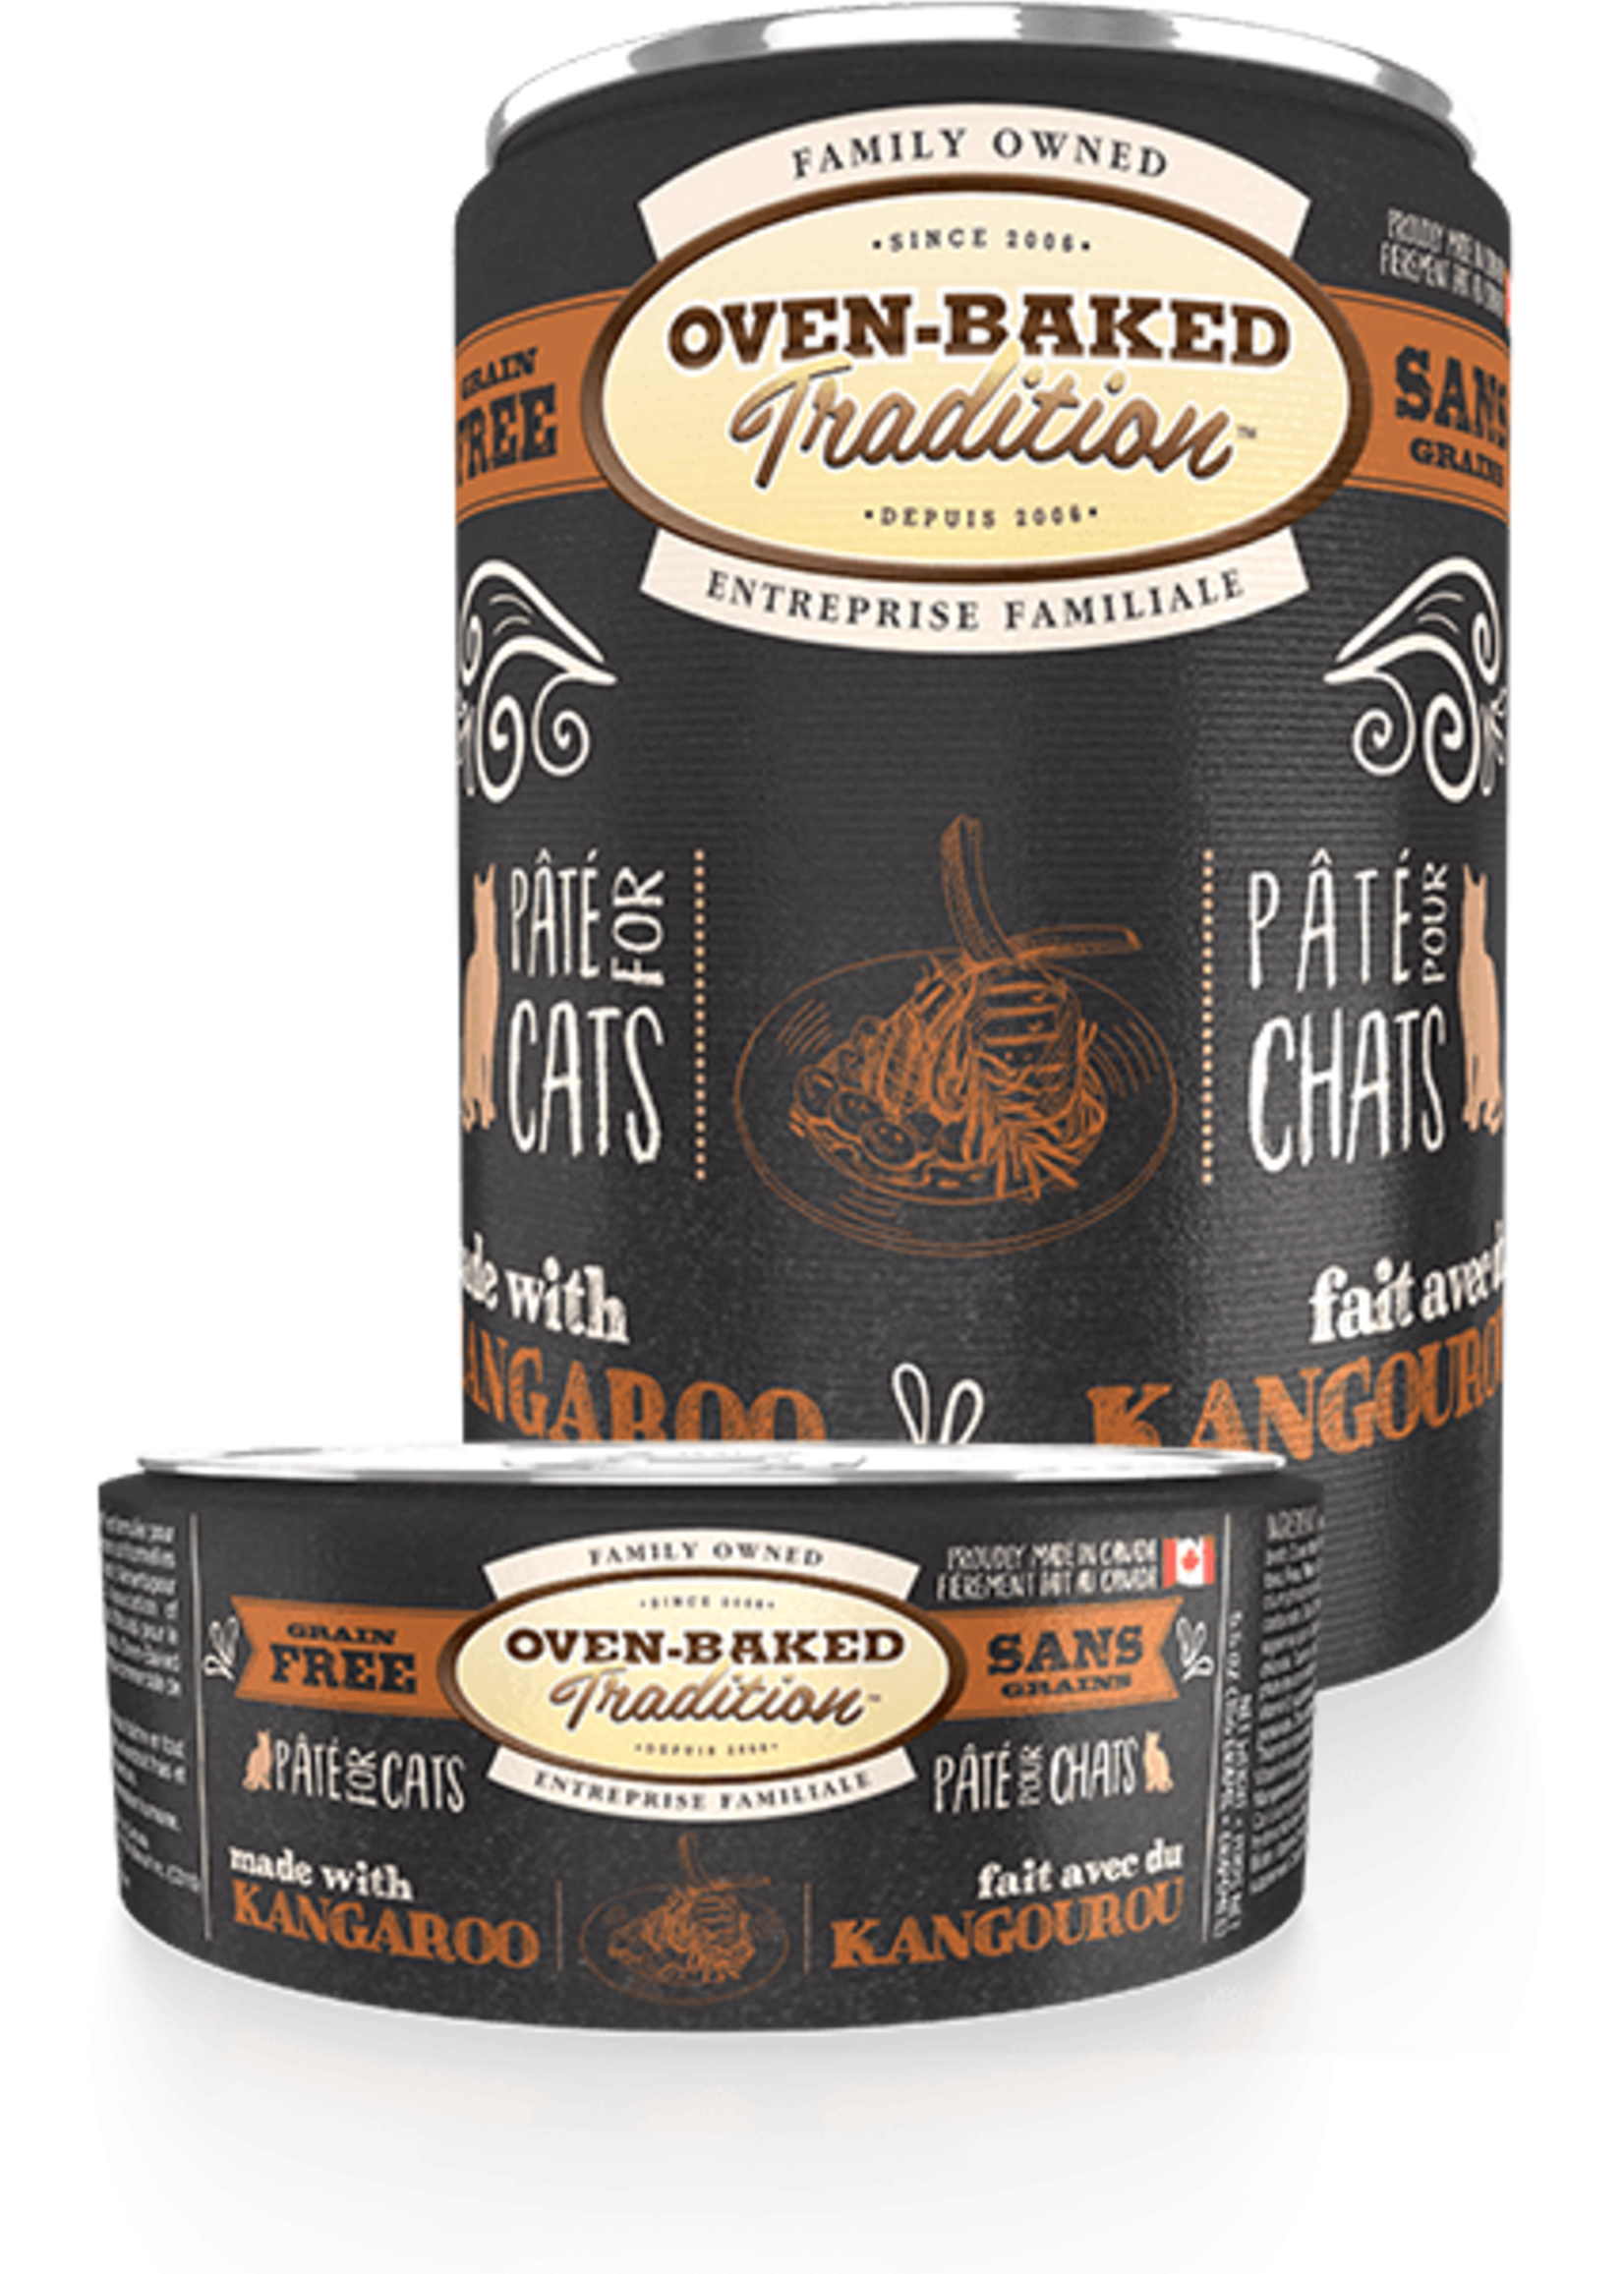 Ovenbaked Tradition Oven-Baked Tradition Cat GF Kangaroo 5.5oz